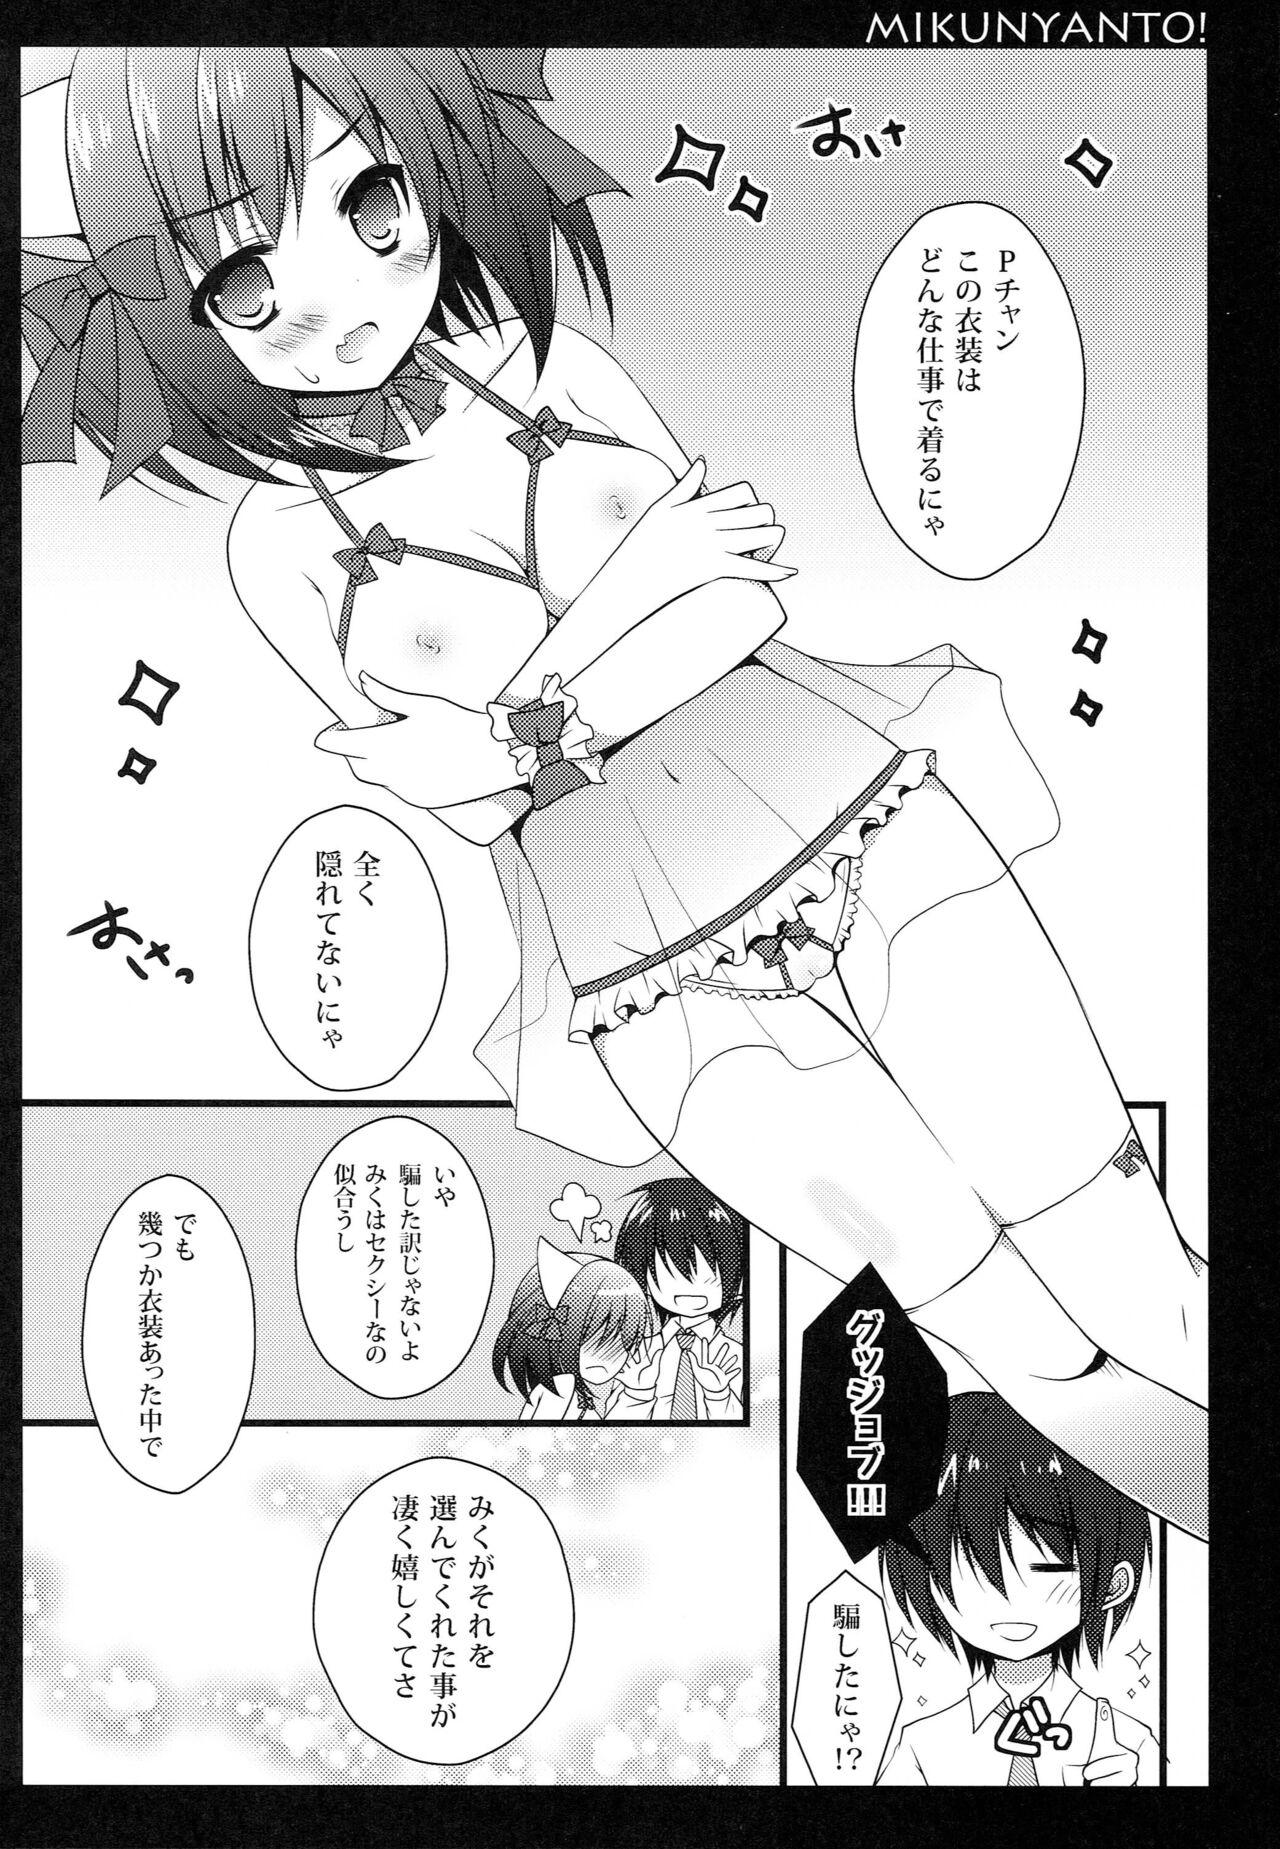 Bubblebutt Miku Nyan to! - The idolmaster Double - Page 9